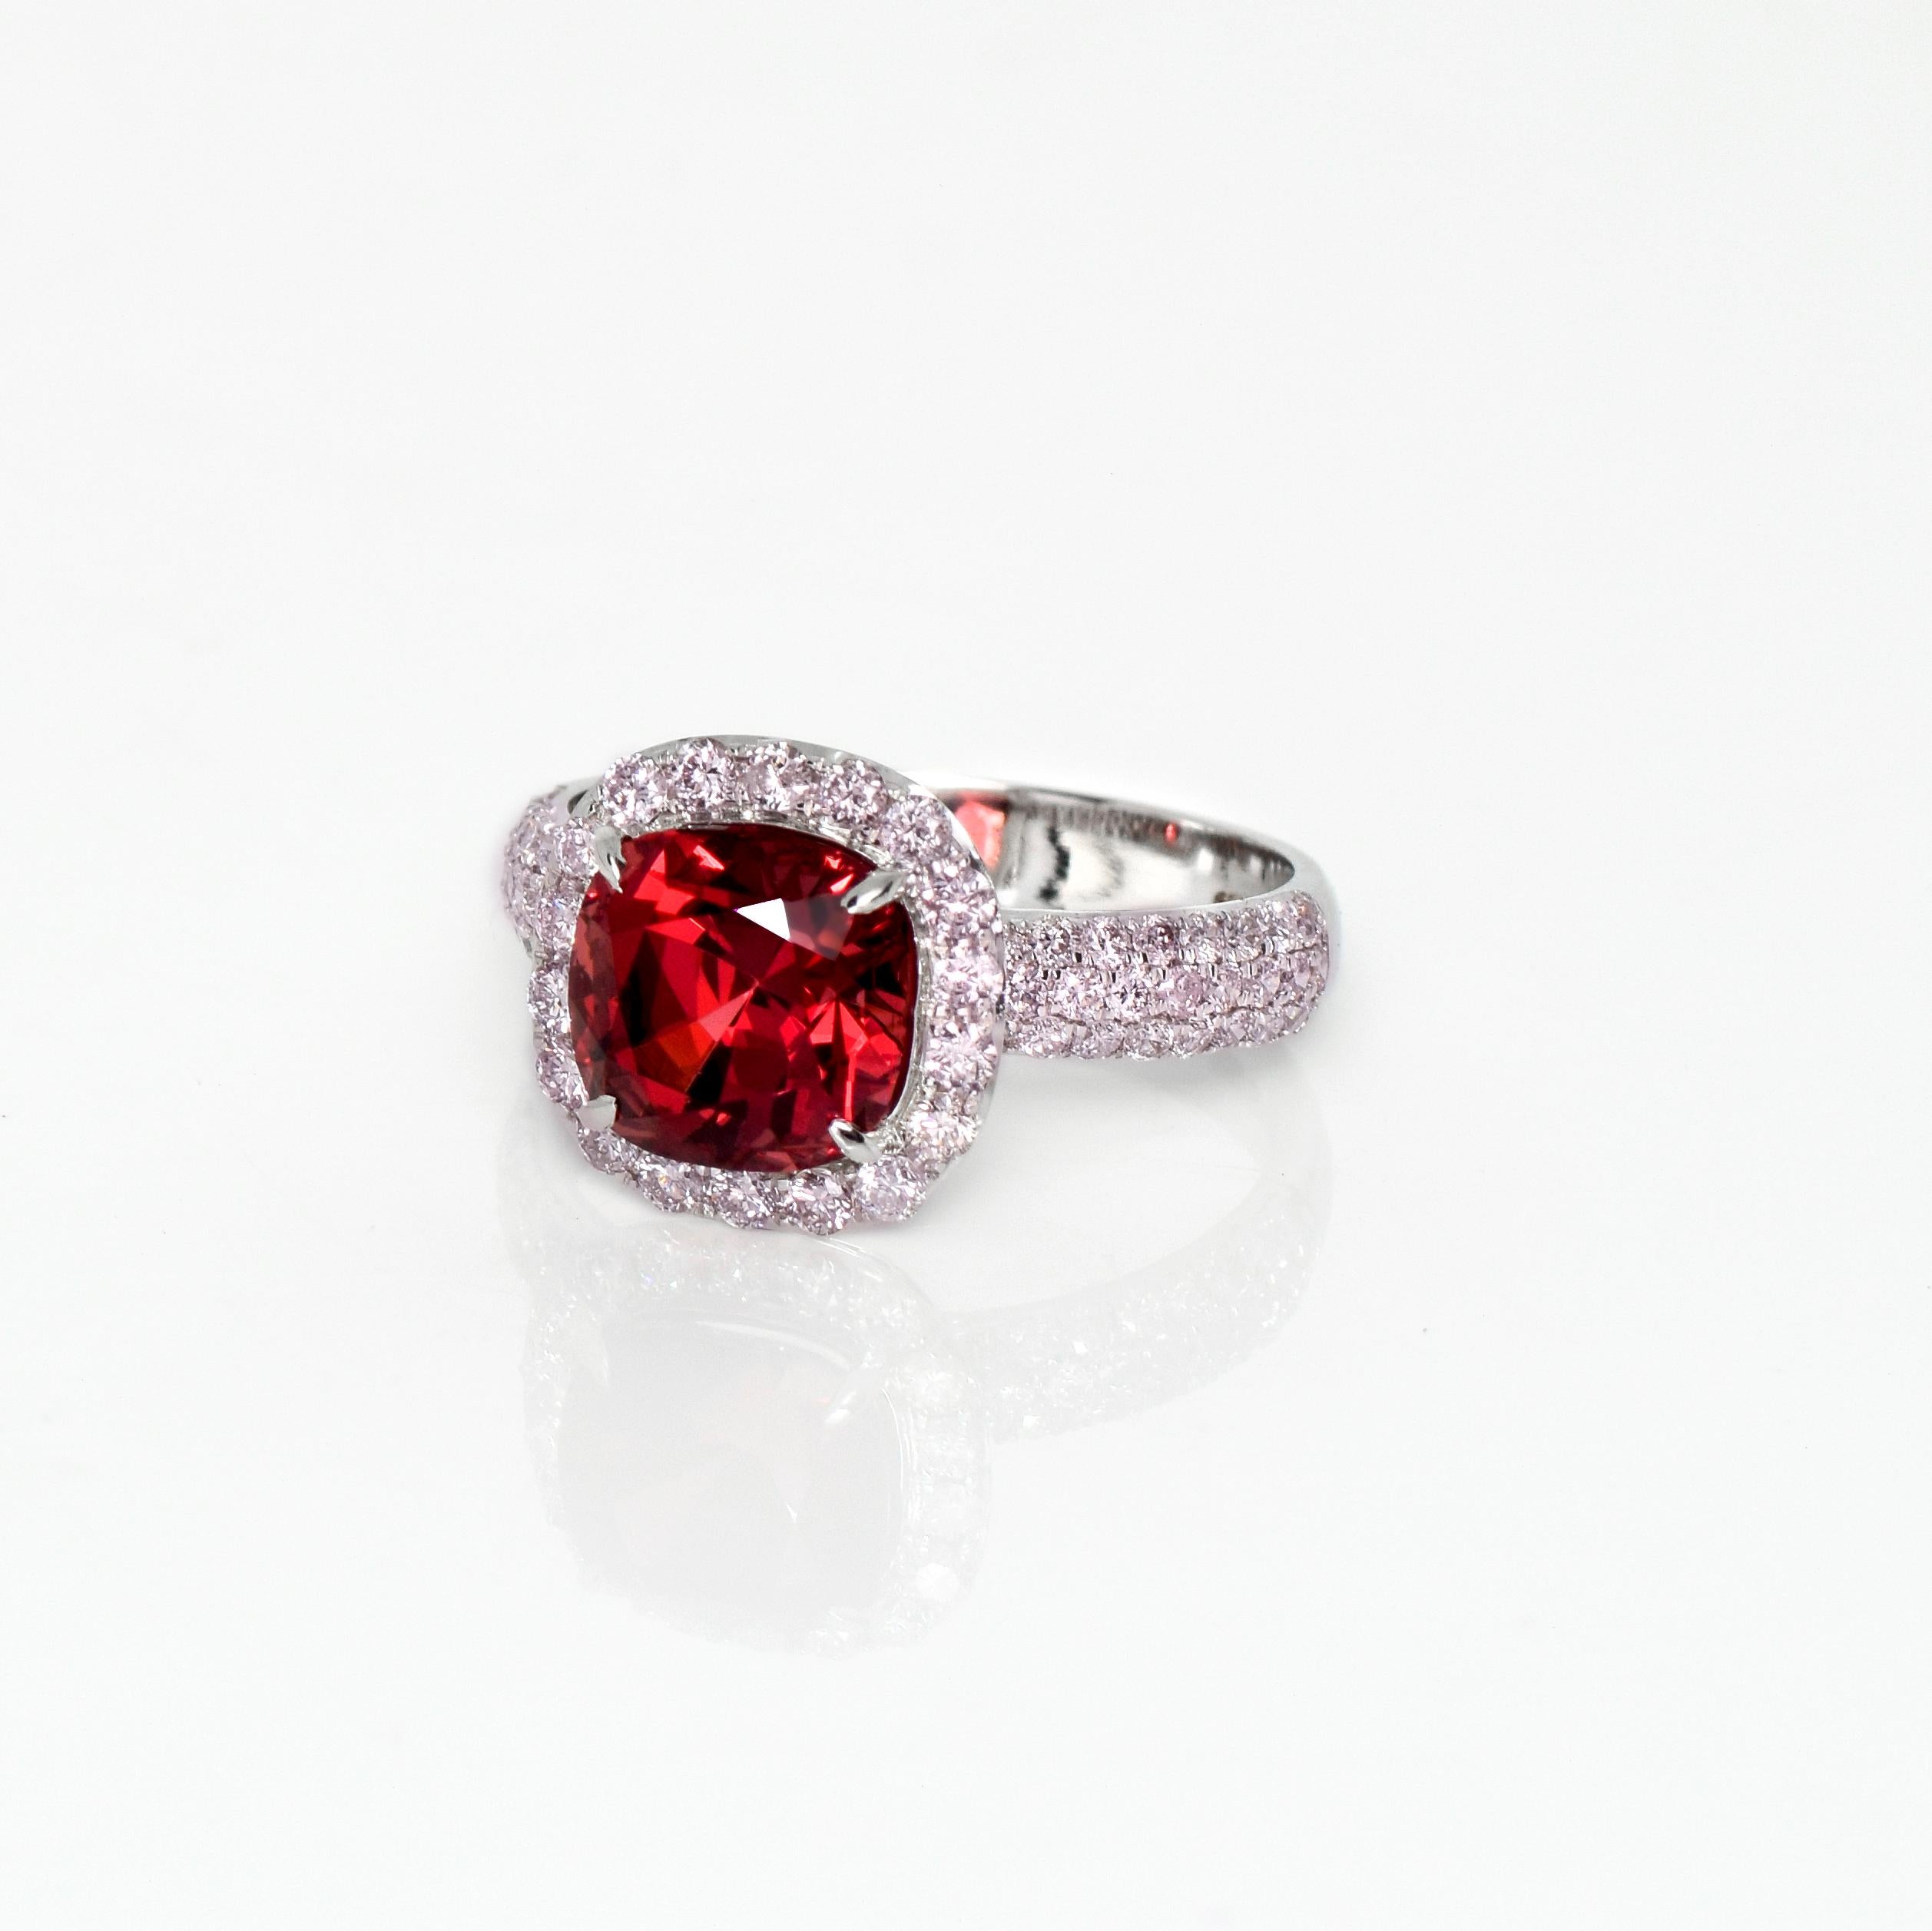 Cushion Cut IGI 18K 3.09 Ct Red Spinel&Pink Diamonds Antique Engagement Ring For Sale